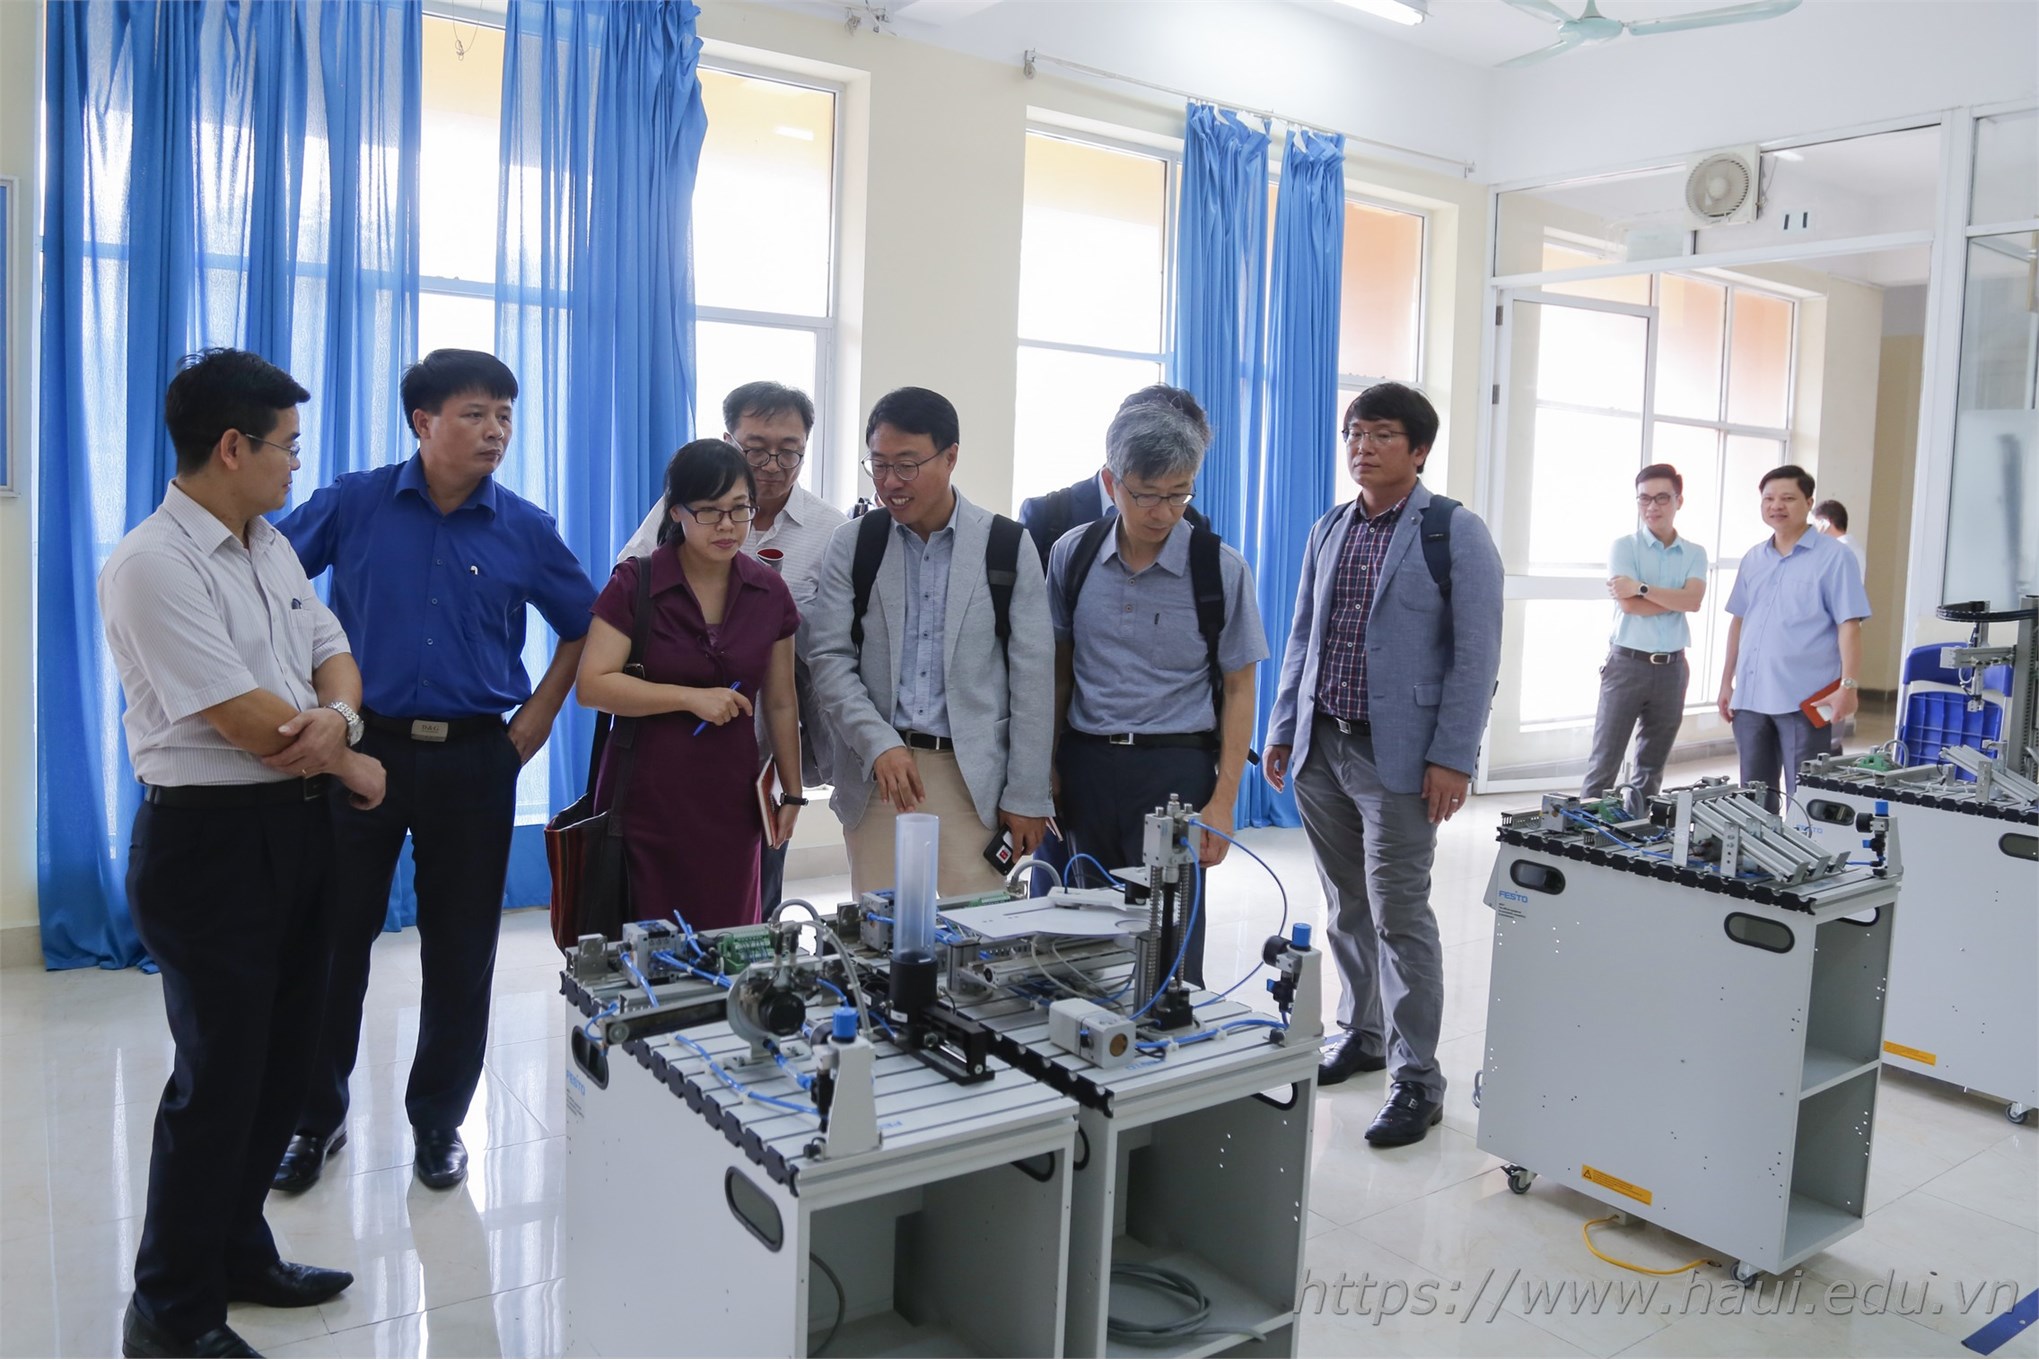 VITASK project at Hanoi Univerity of Industry